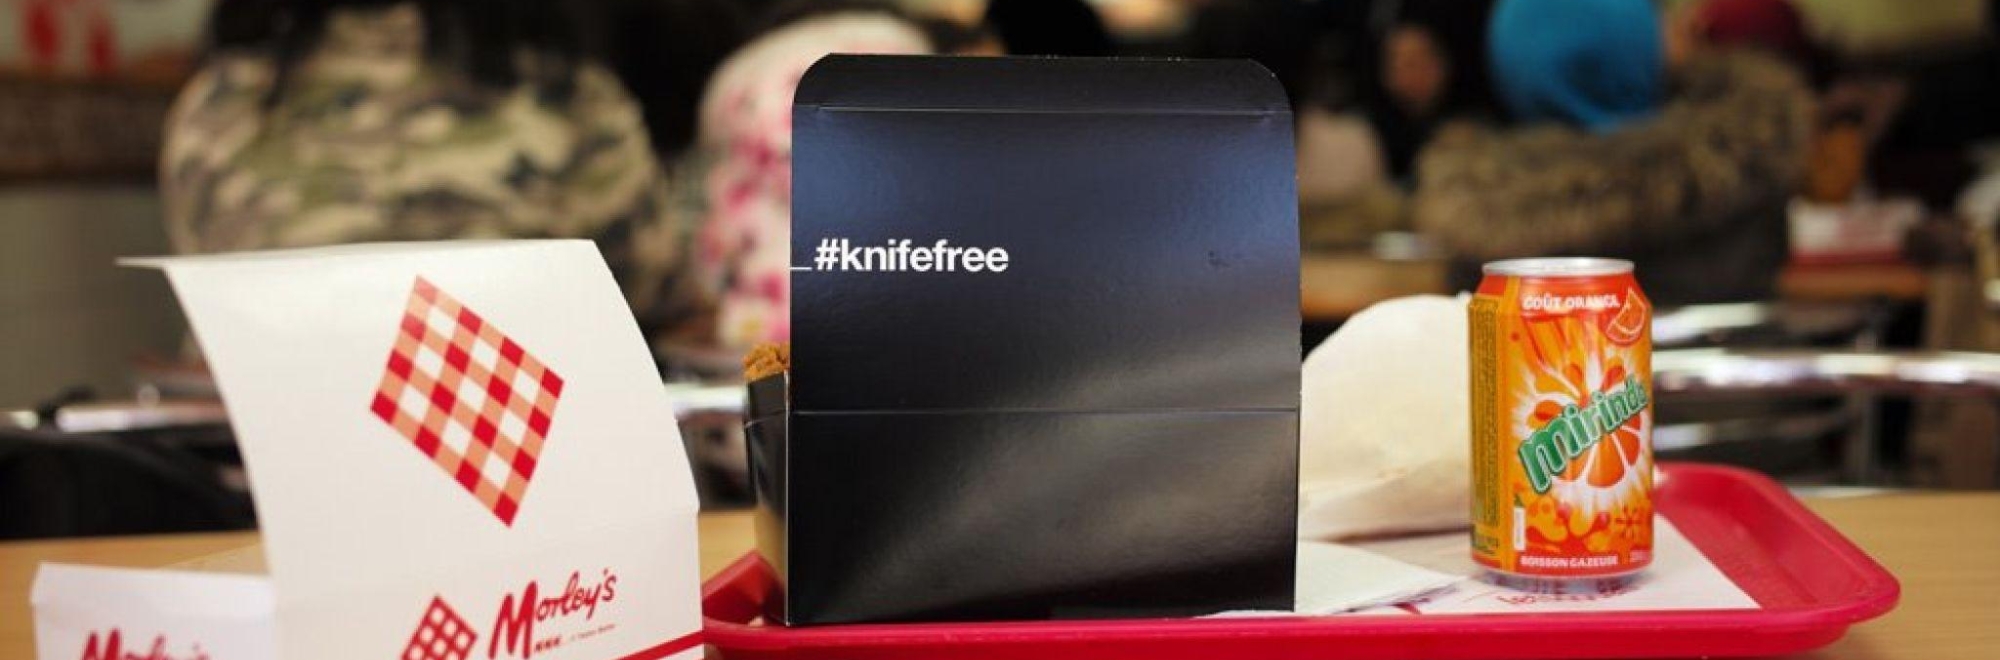 Has there ever been a worse idea than the Home Office's #knifefree chicken boxes?